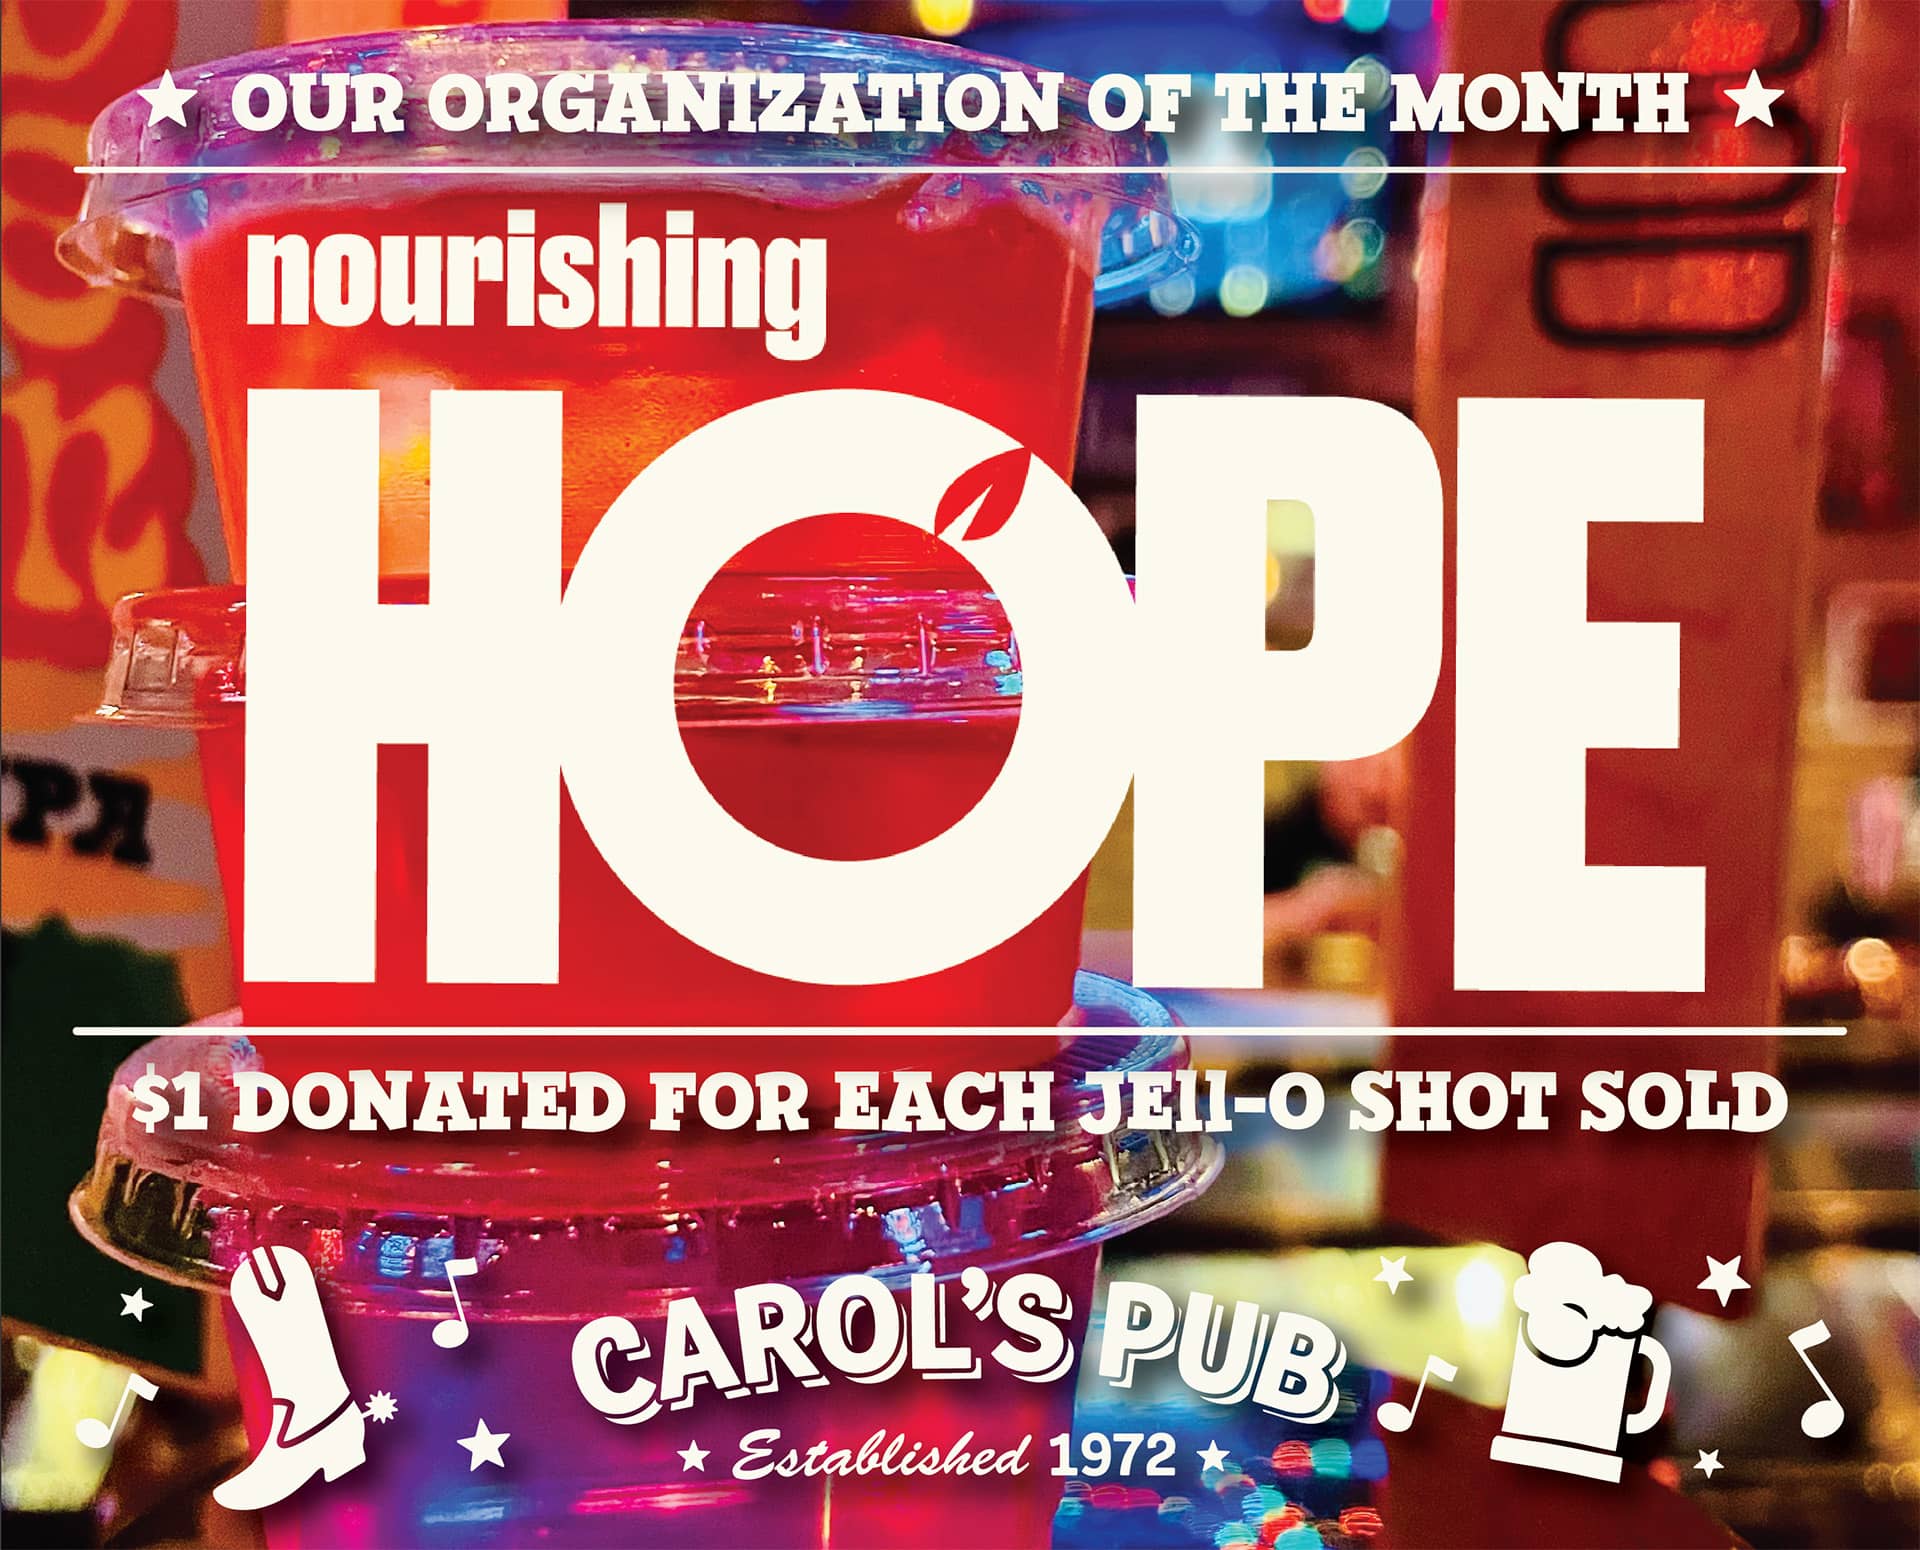 Poster for Nourishing Hope, May's Organization of the Month